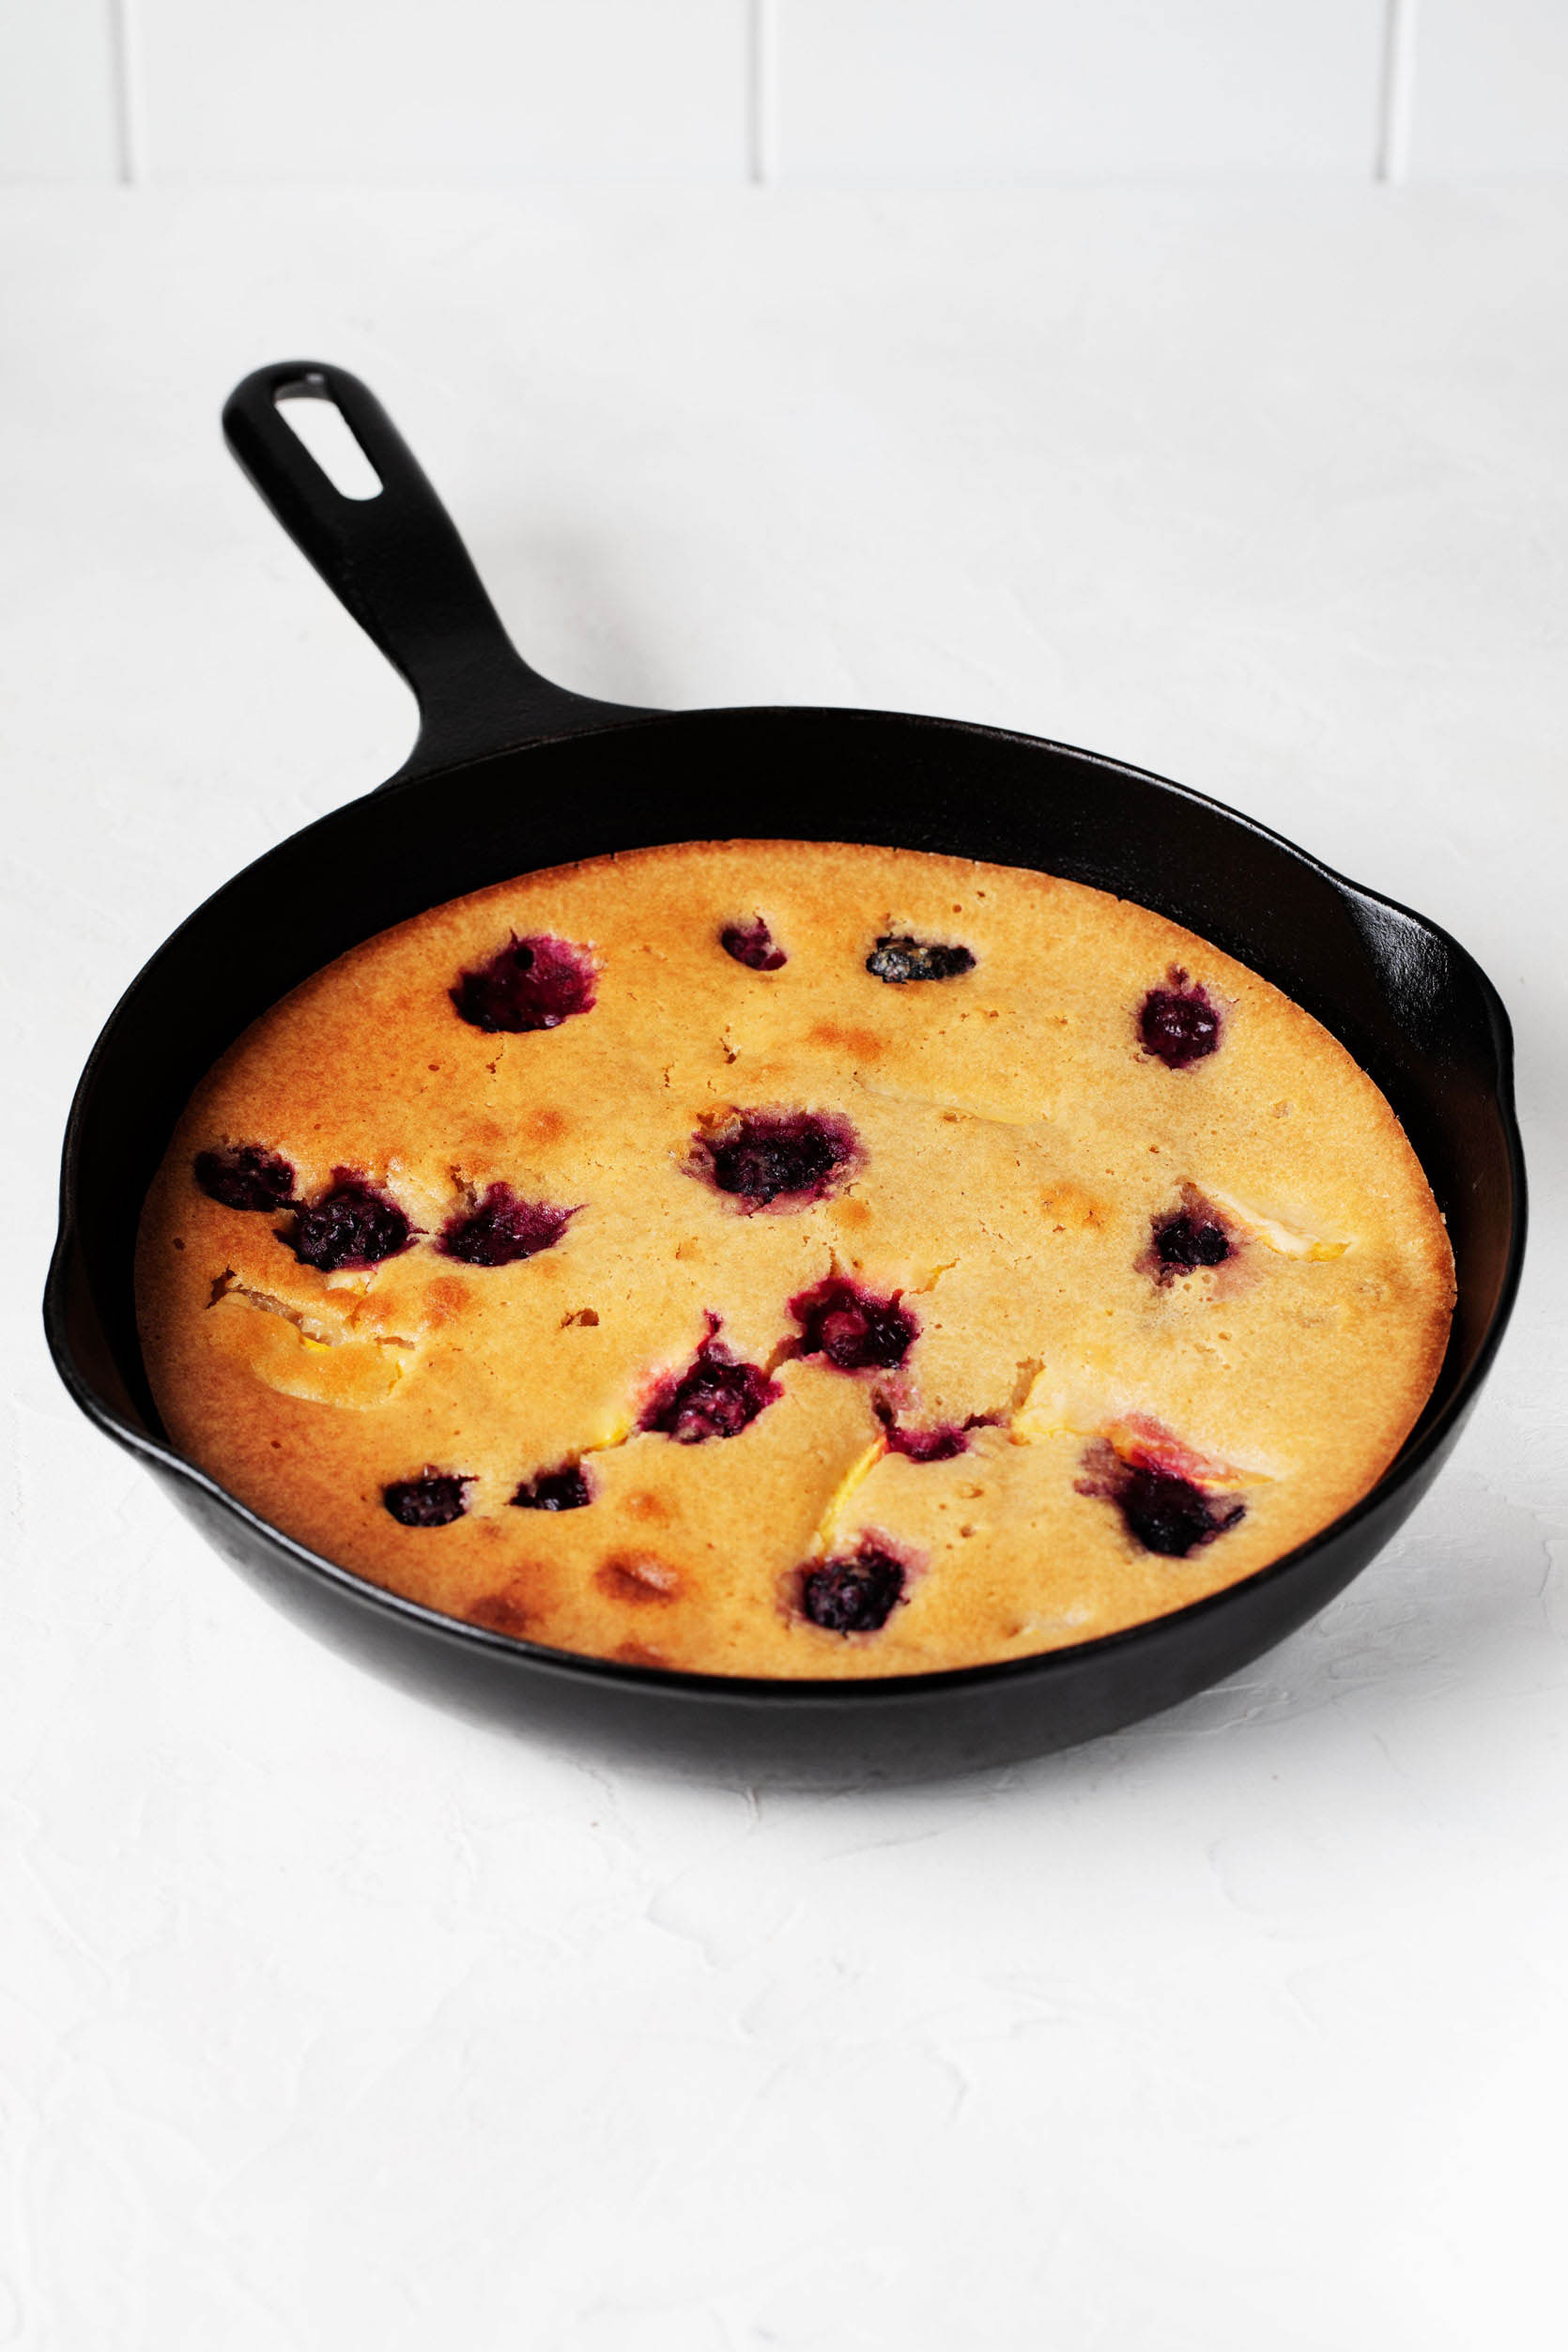 A black, cast iron skillet is filled with a vegan peach blackberry cake.